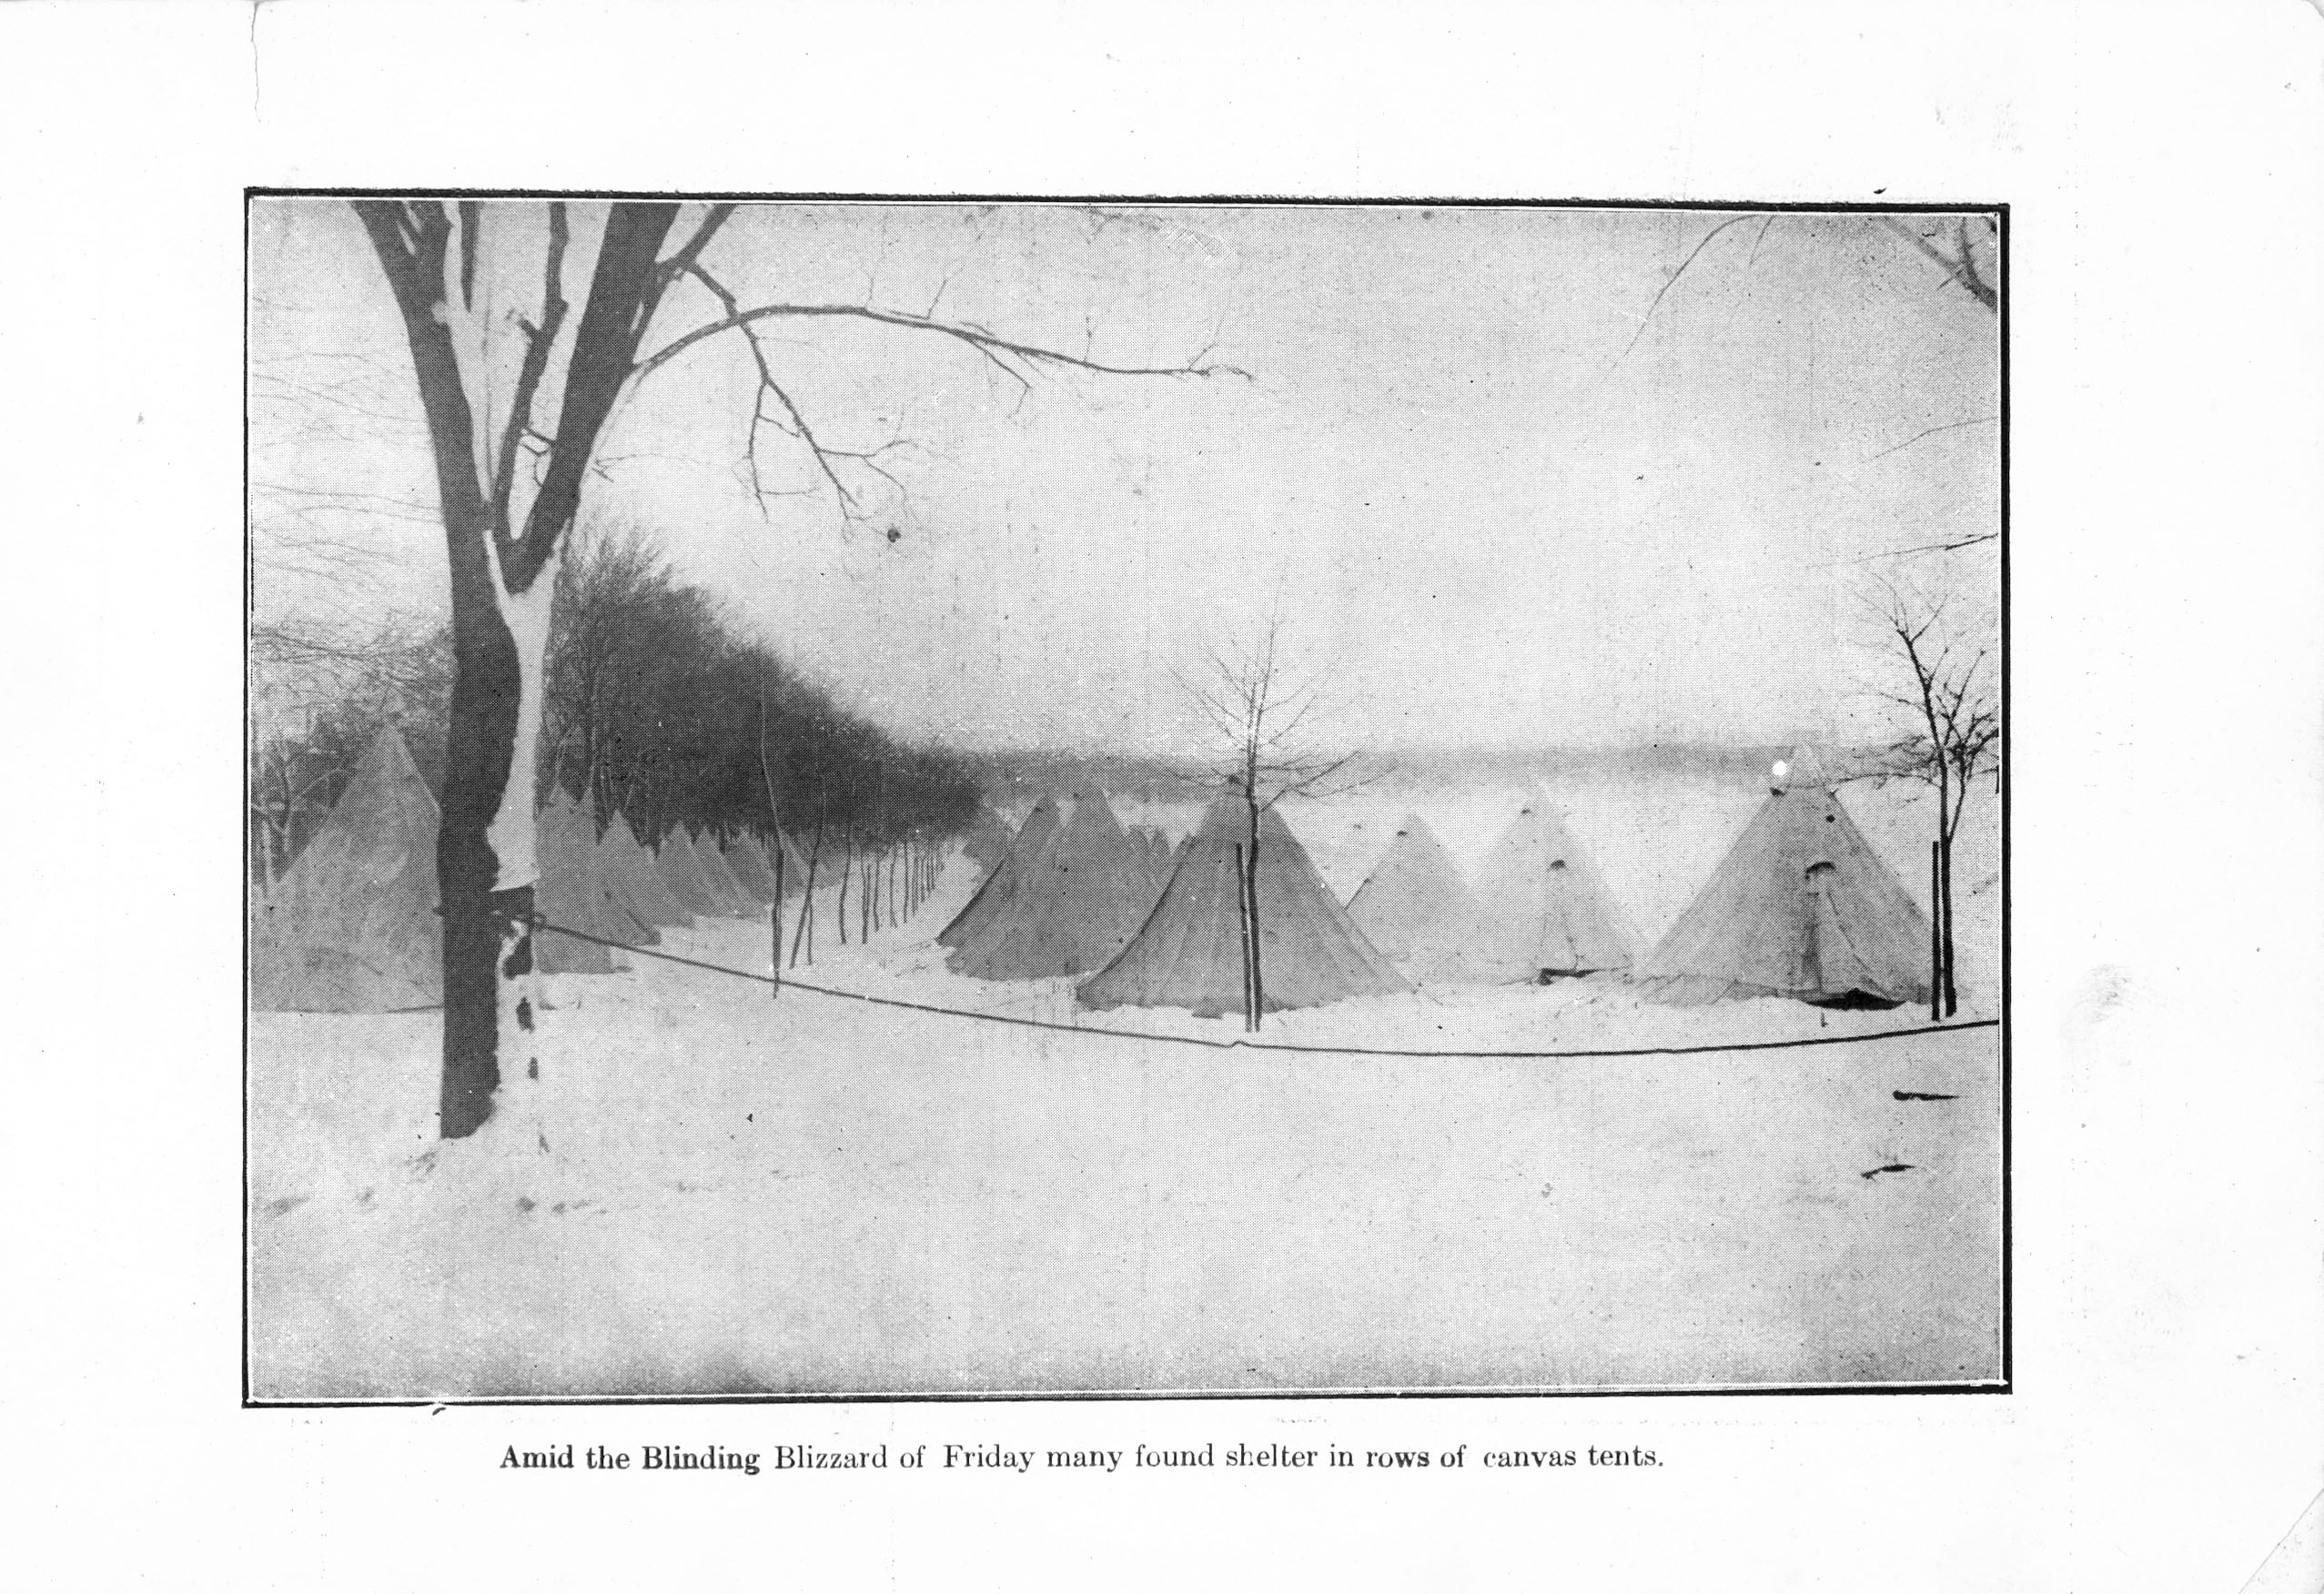 Black and white photo of rows of canvas tents in the snow, with caption “Amid the Blinding Blizzard of Friday many found shelter in rows of canvas tents”